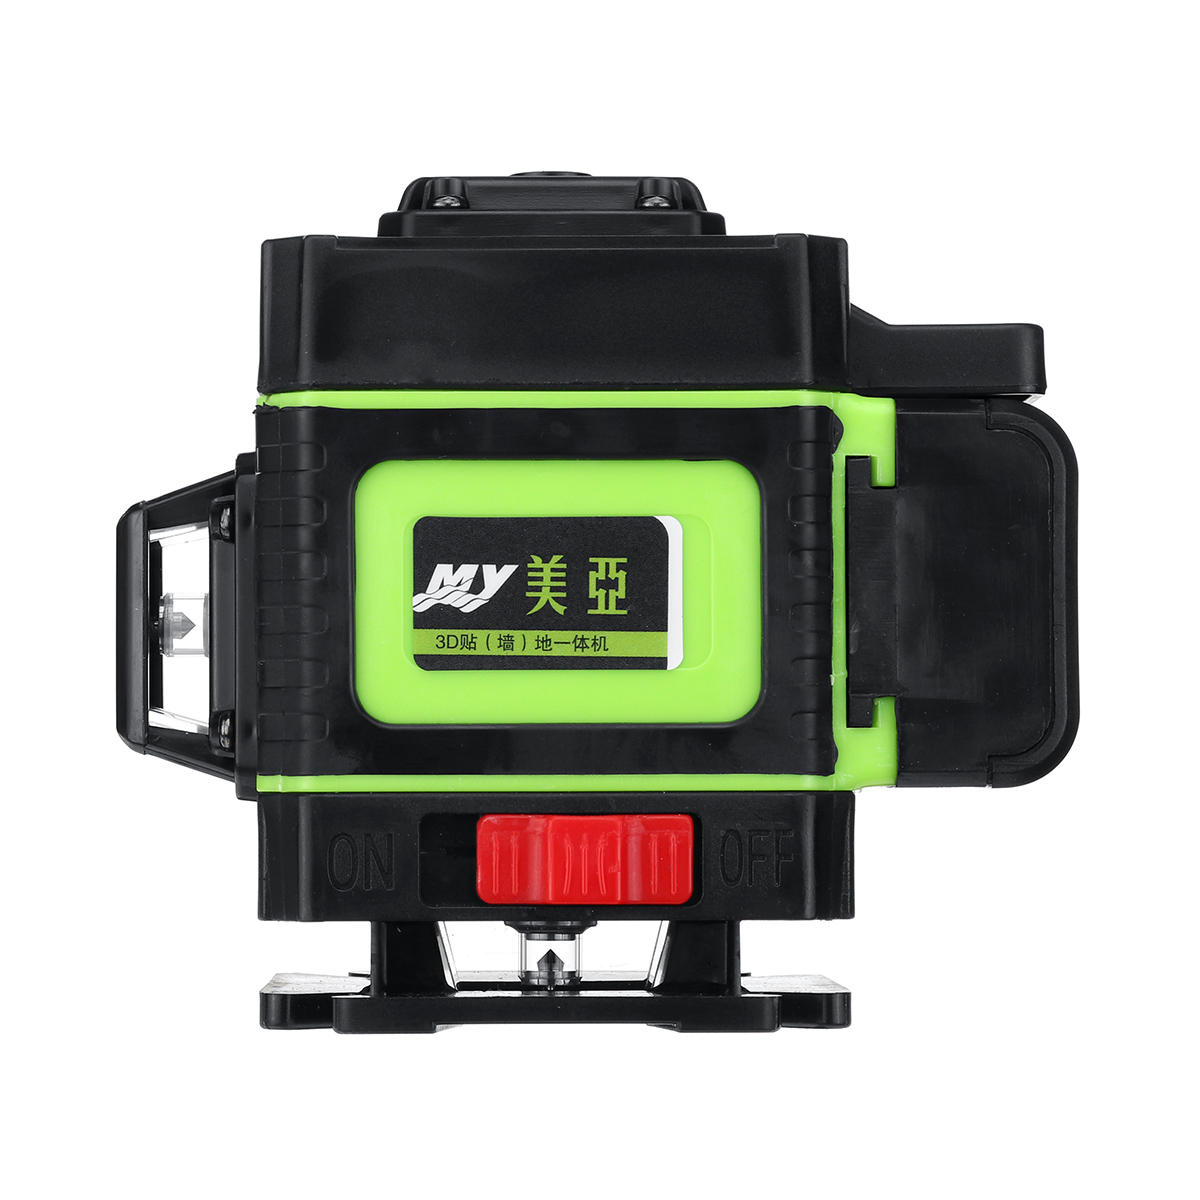 12 Blue Lines Laser Level Measuring DevicesLine 360 Degree Rotary Horizontal And Vertical Cross Lase